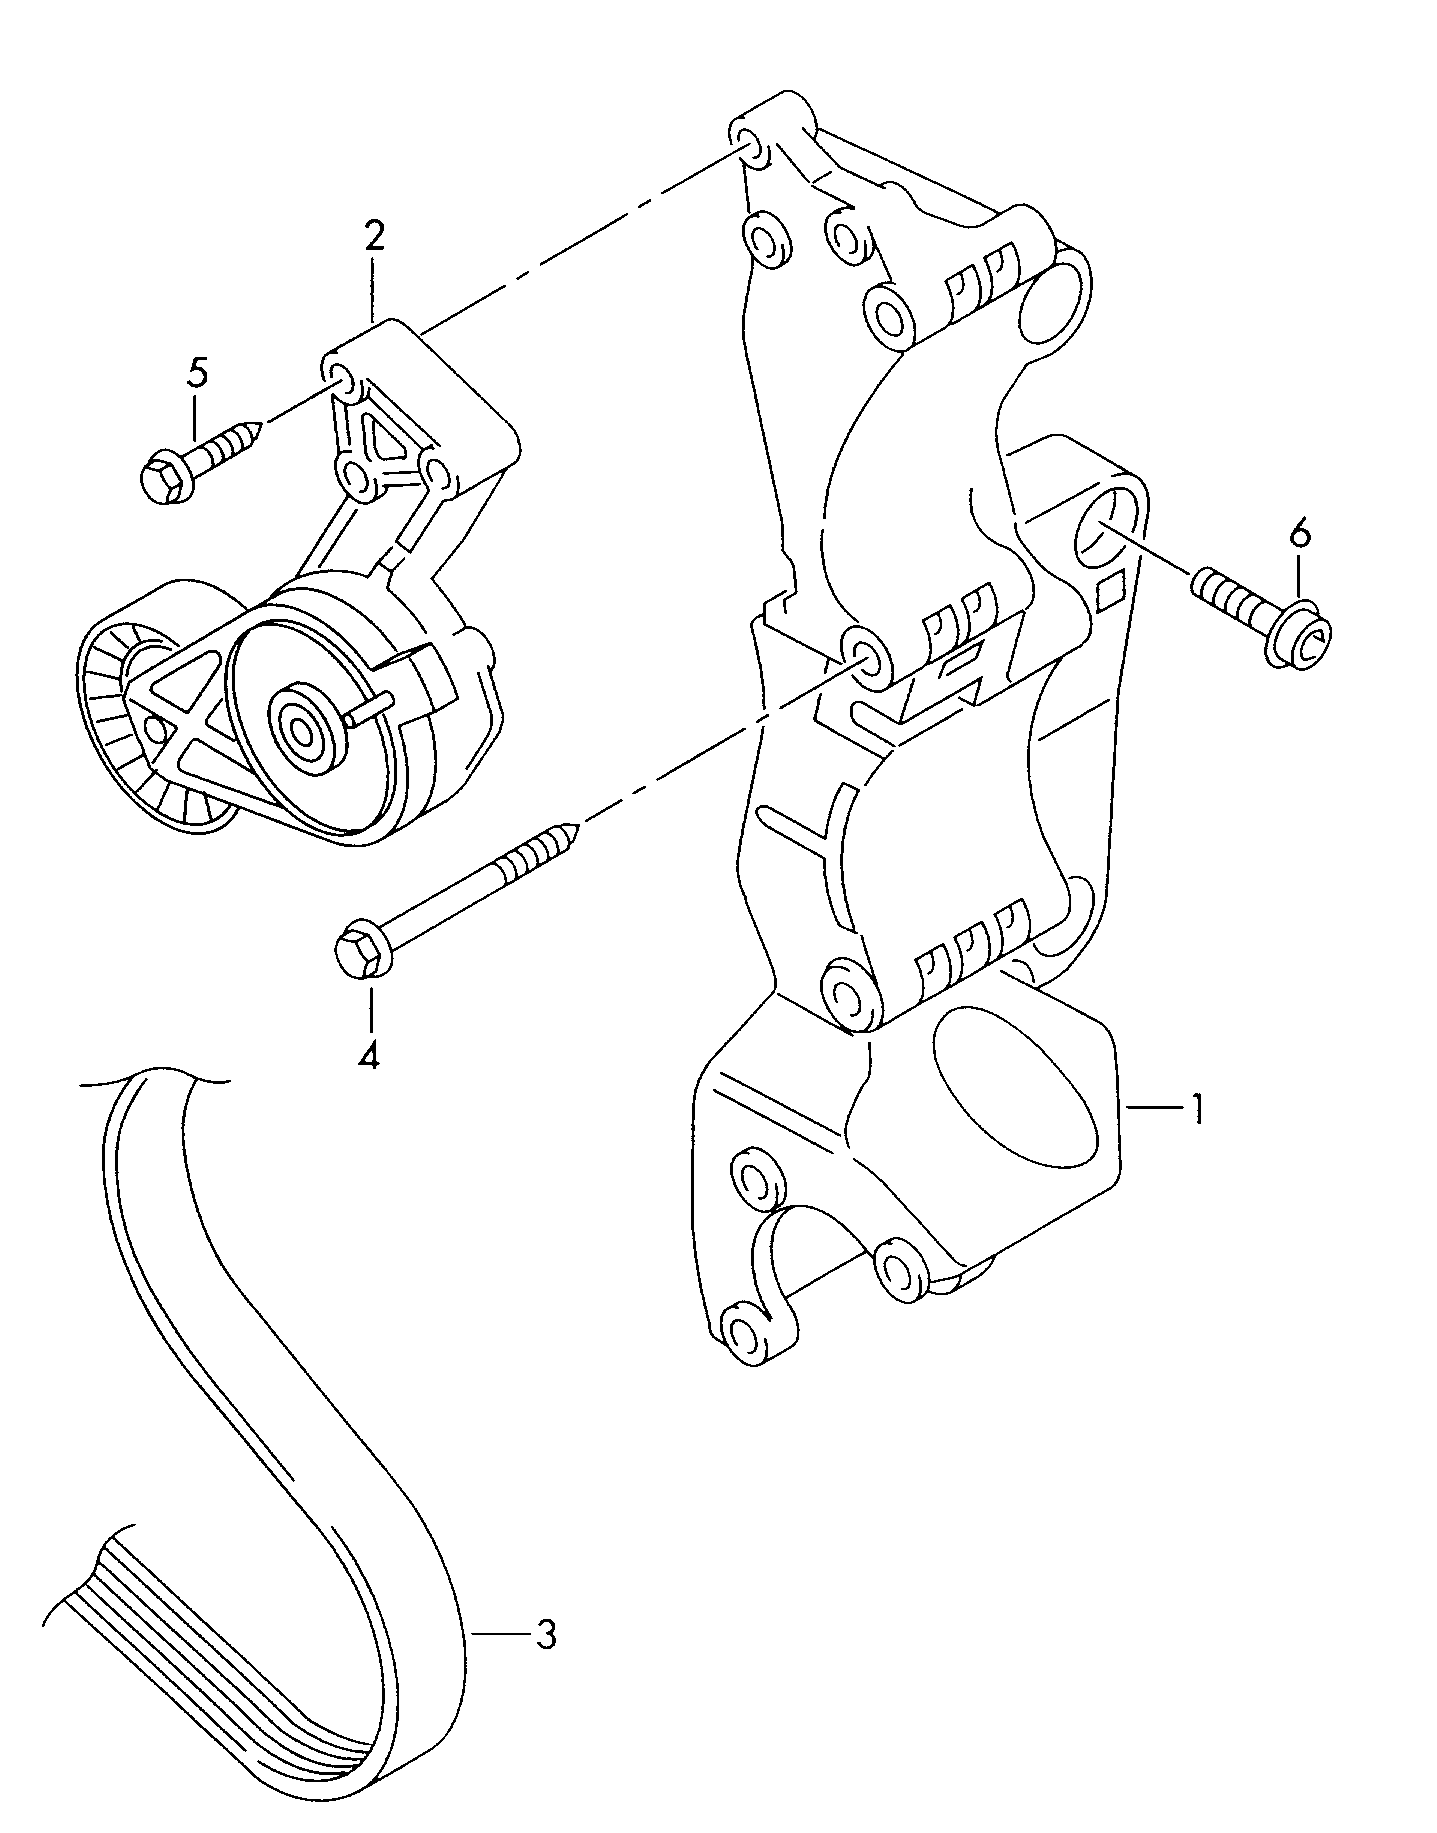 connecting and mounting parts<br>for alternatorPoly-V-belt 2.0 Ltr. - Otto-/Gas-Ind.Motore - imot